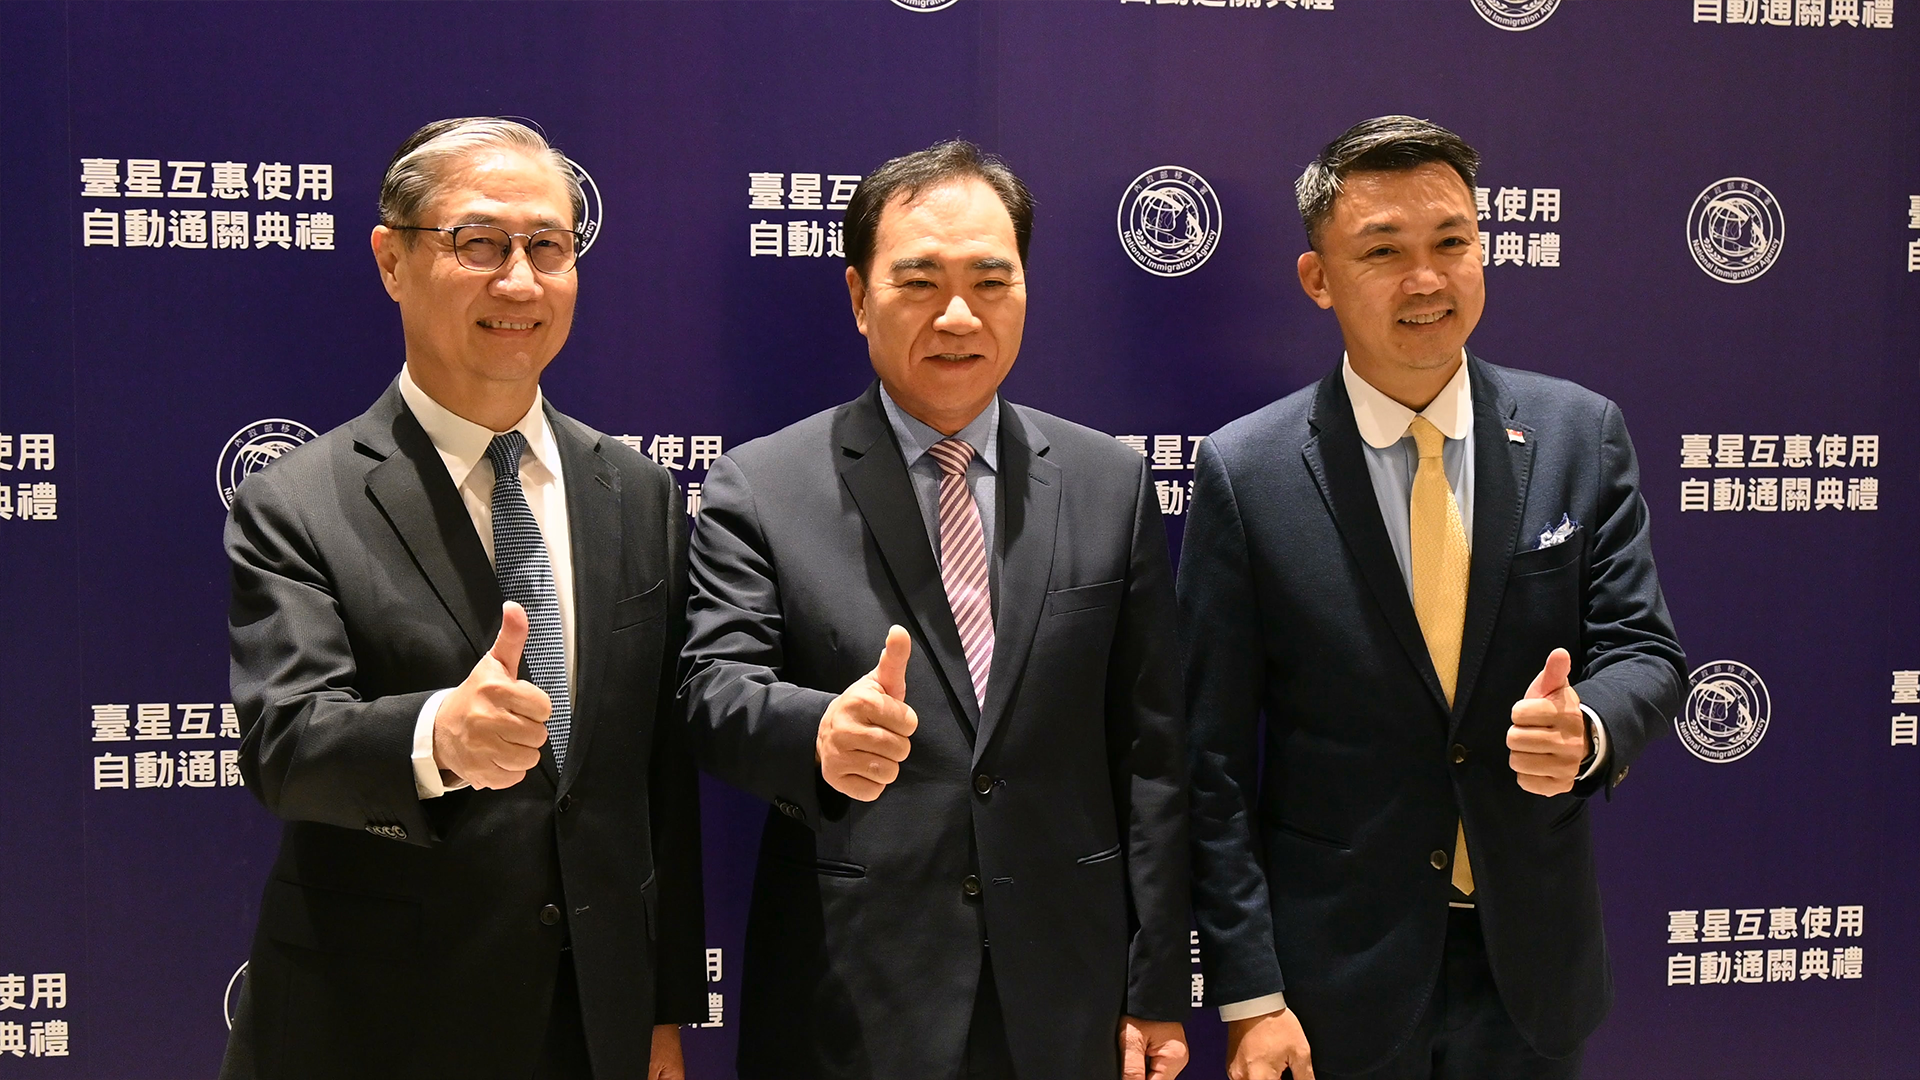 The Director-General of National Immigration Agency Mr. Chung (鐘景琨) (left), The Deputy Minister Mr. Wu (吳容輝) of Ministry of the Interior (middle), Mr. Representative Yip (葉偉傑) of Singapore Trade Office in Taipei (right), attended the grand ceremony.  Photo provided by Taiwan Immigrants’ Global News Network 